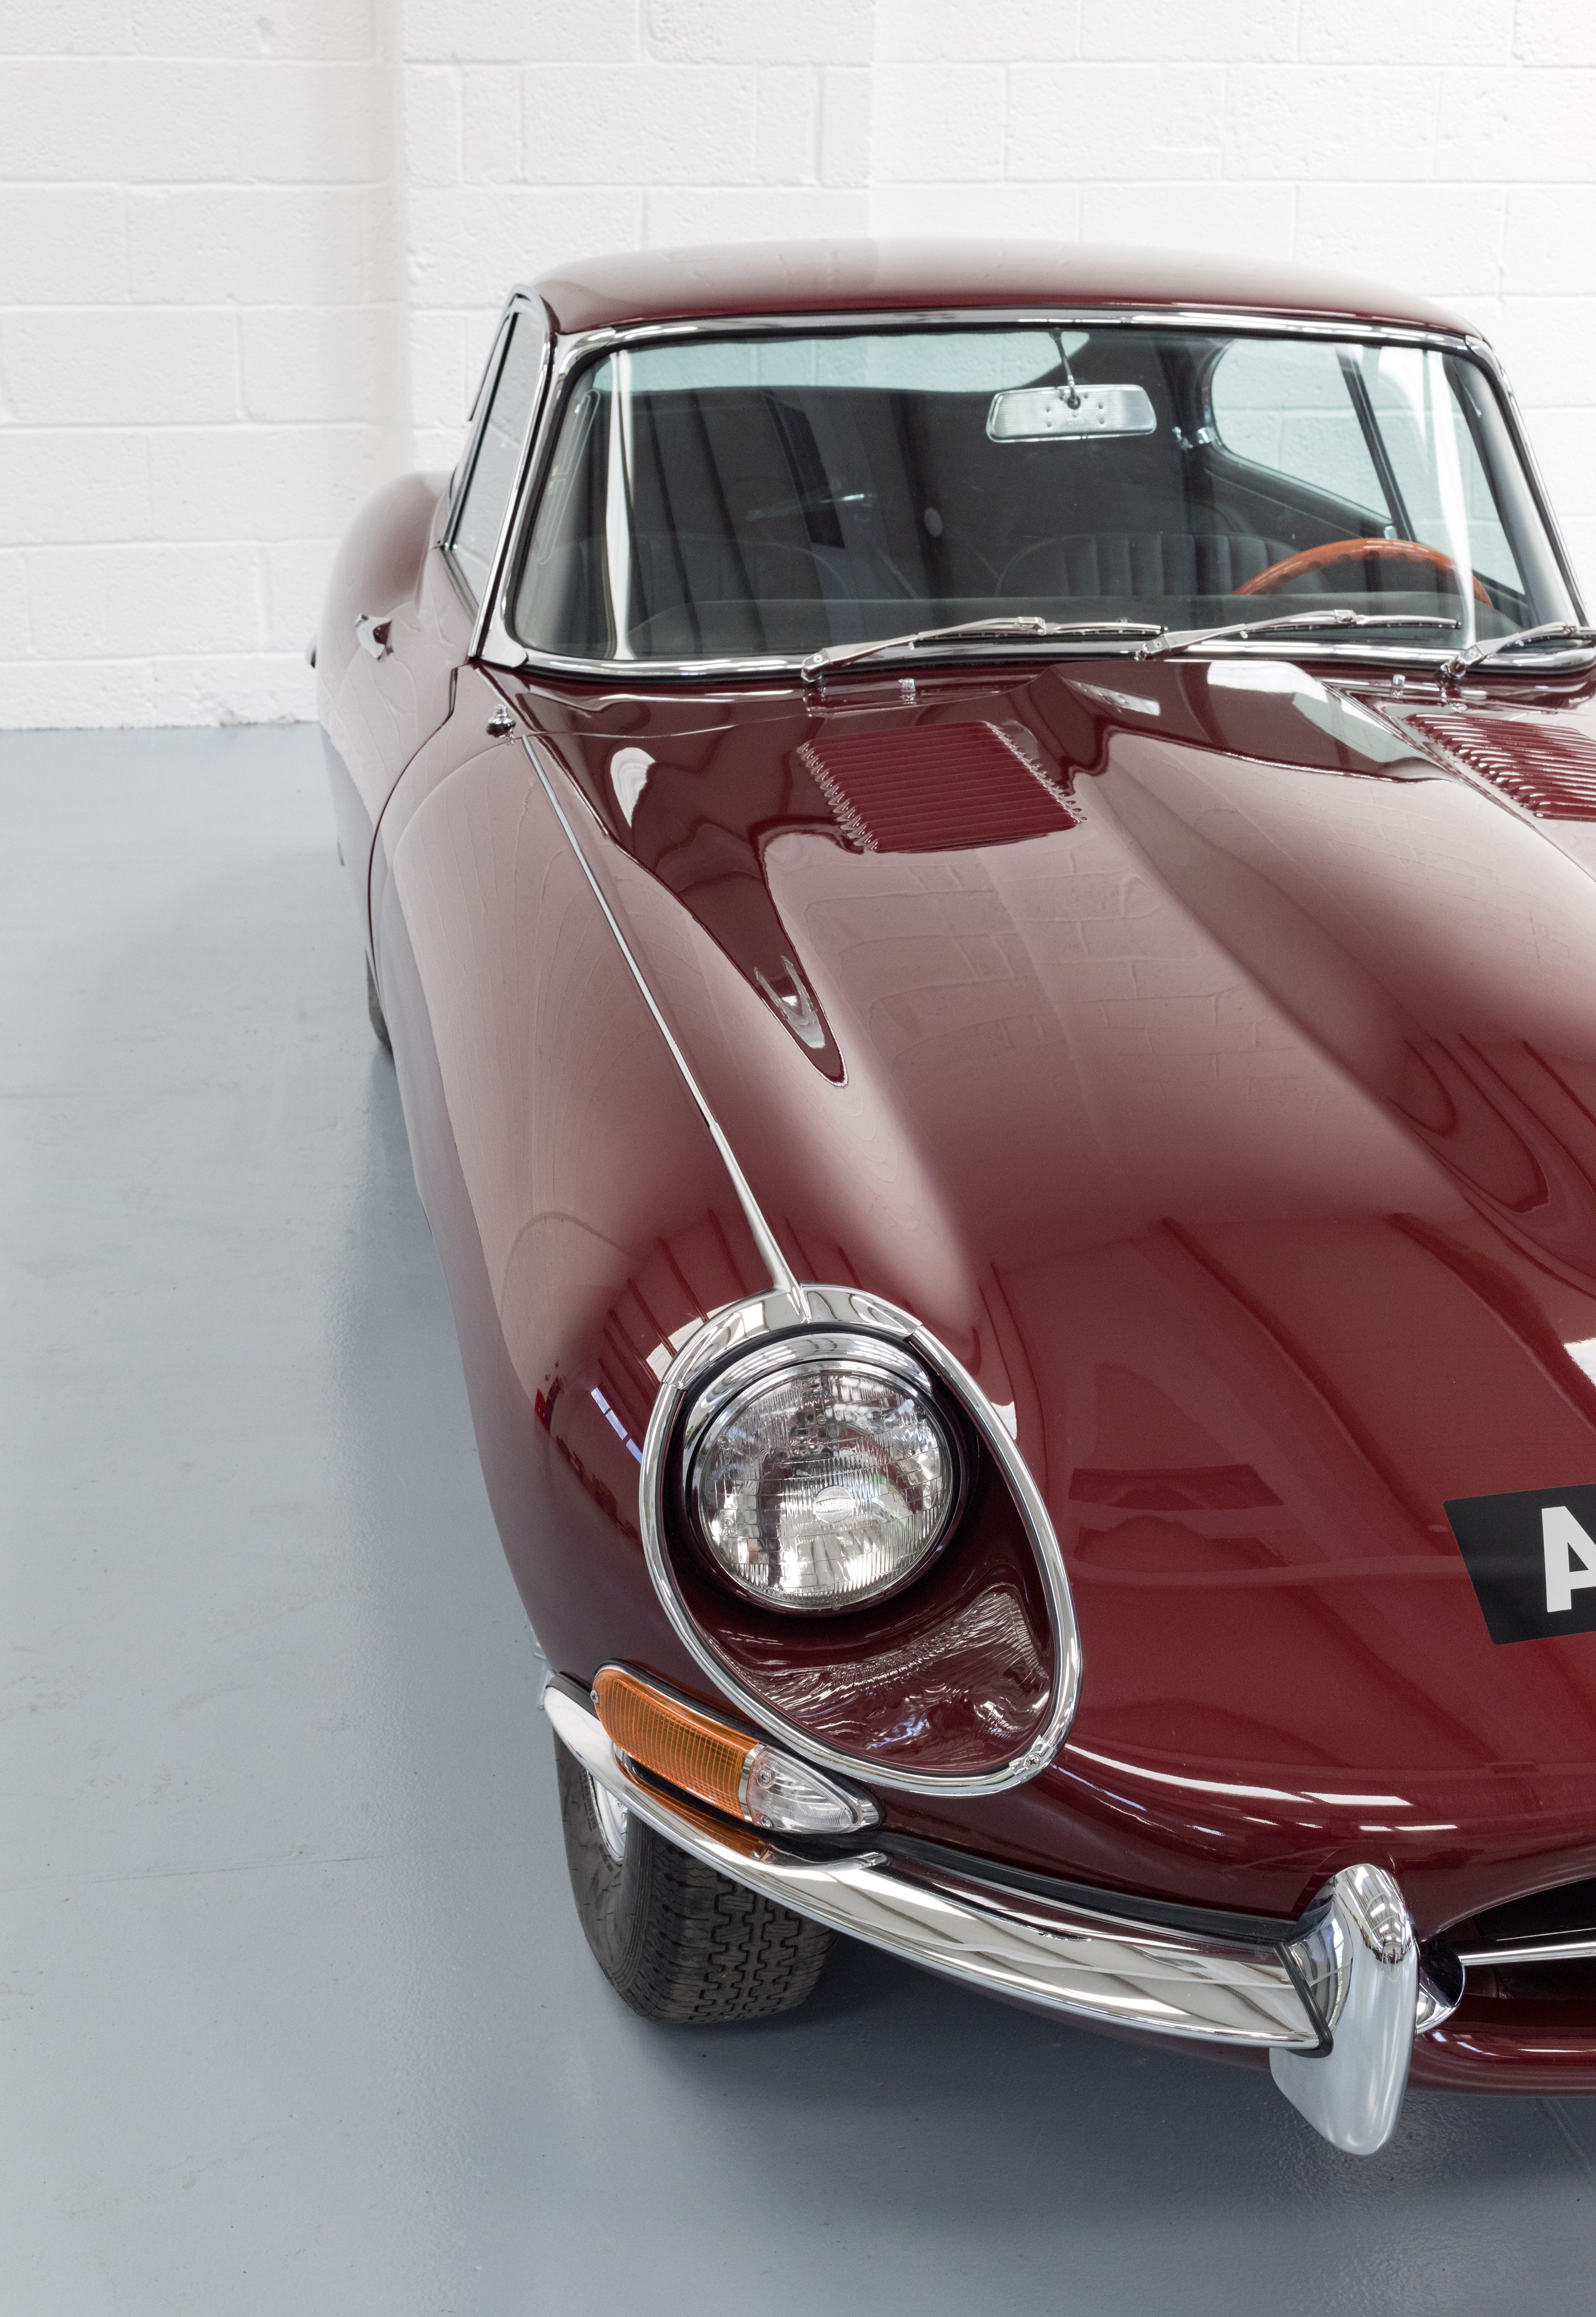 1967 Jaguar E-type Series 1¼ Coupe converted by Electrogenic